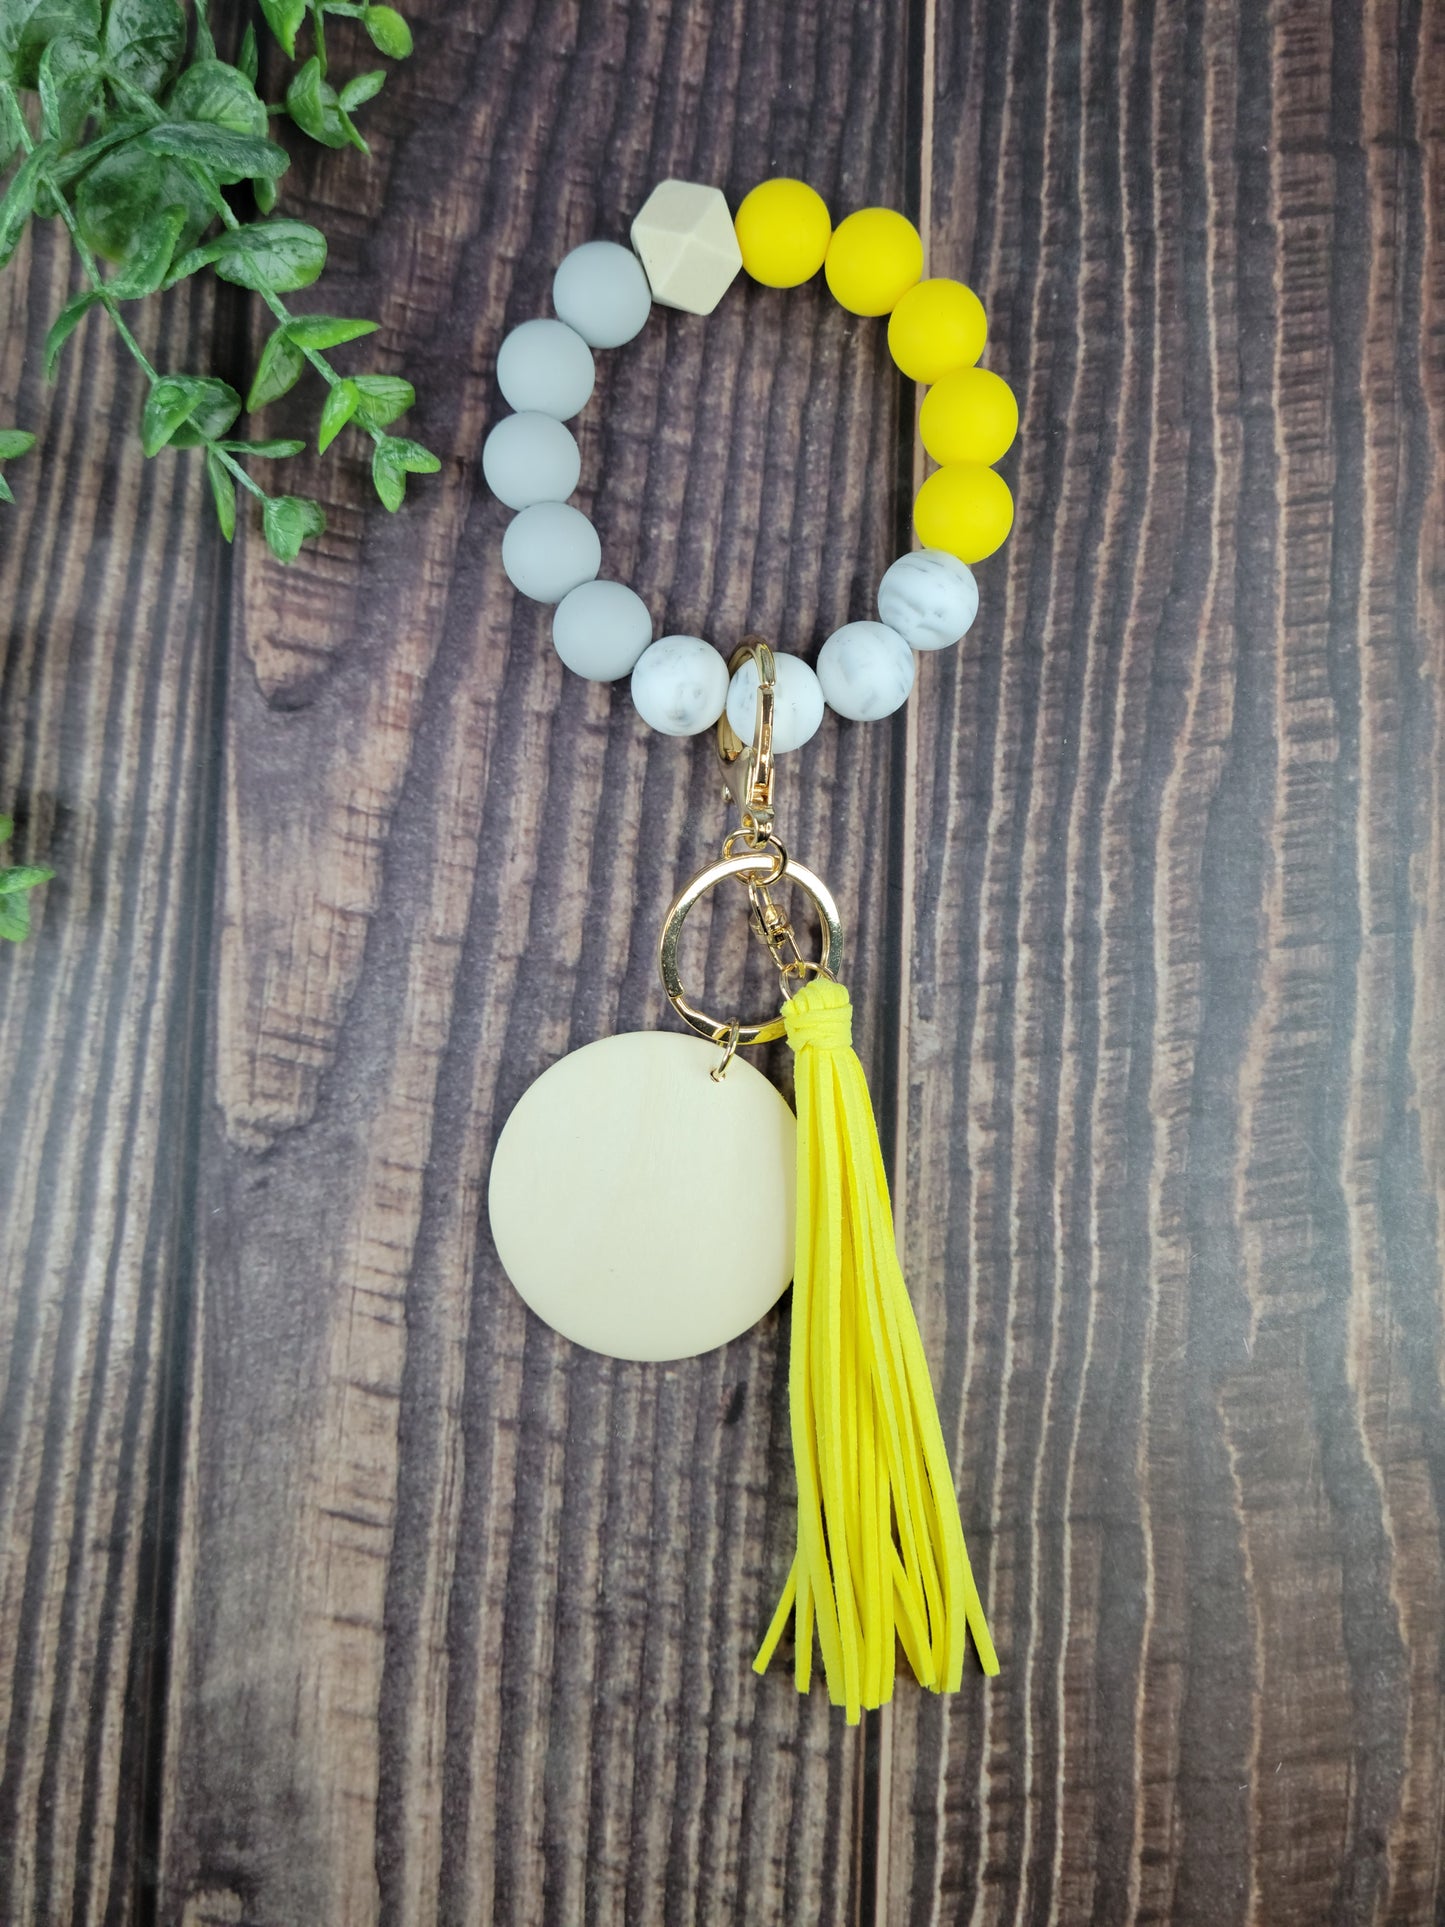 Silicone bead keychain bracelets with 2" light wood disc and tassel, engraving blanks